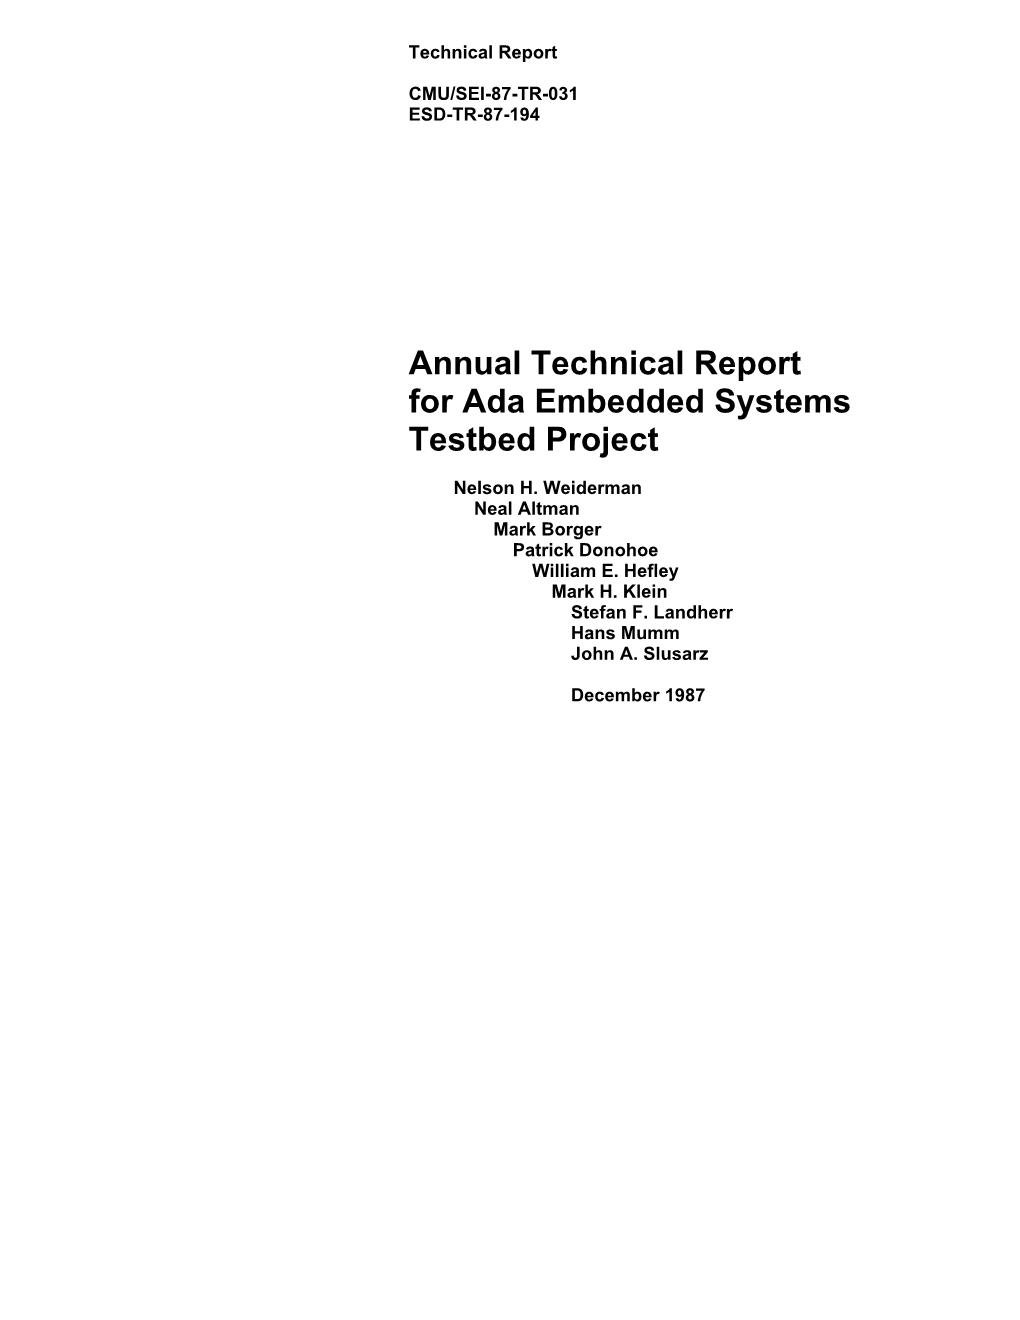 Annual Technical Report for Ada Embedded Systems Testbed Project